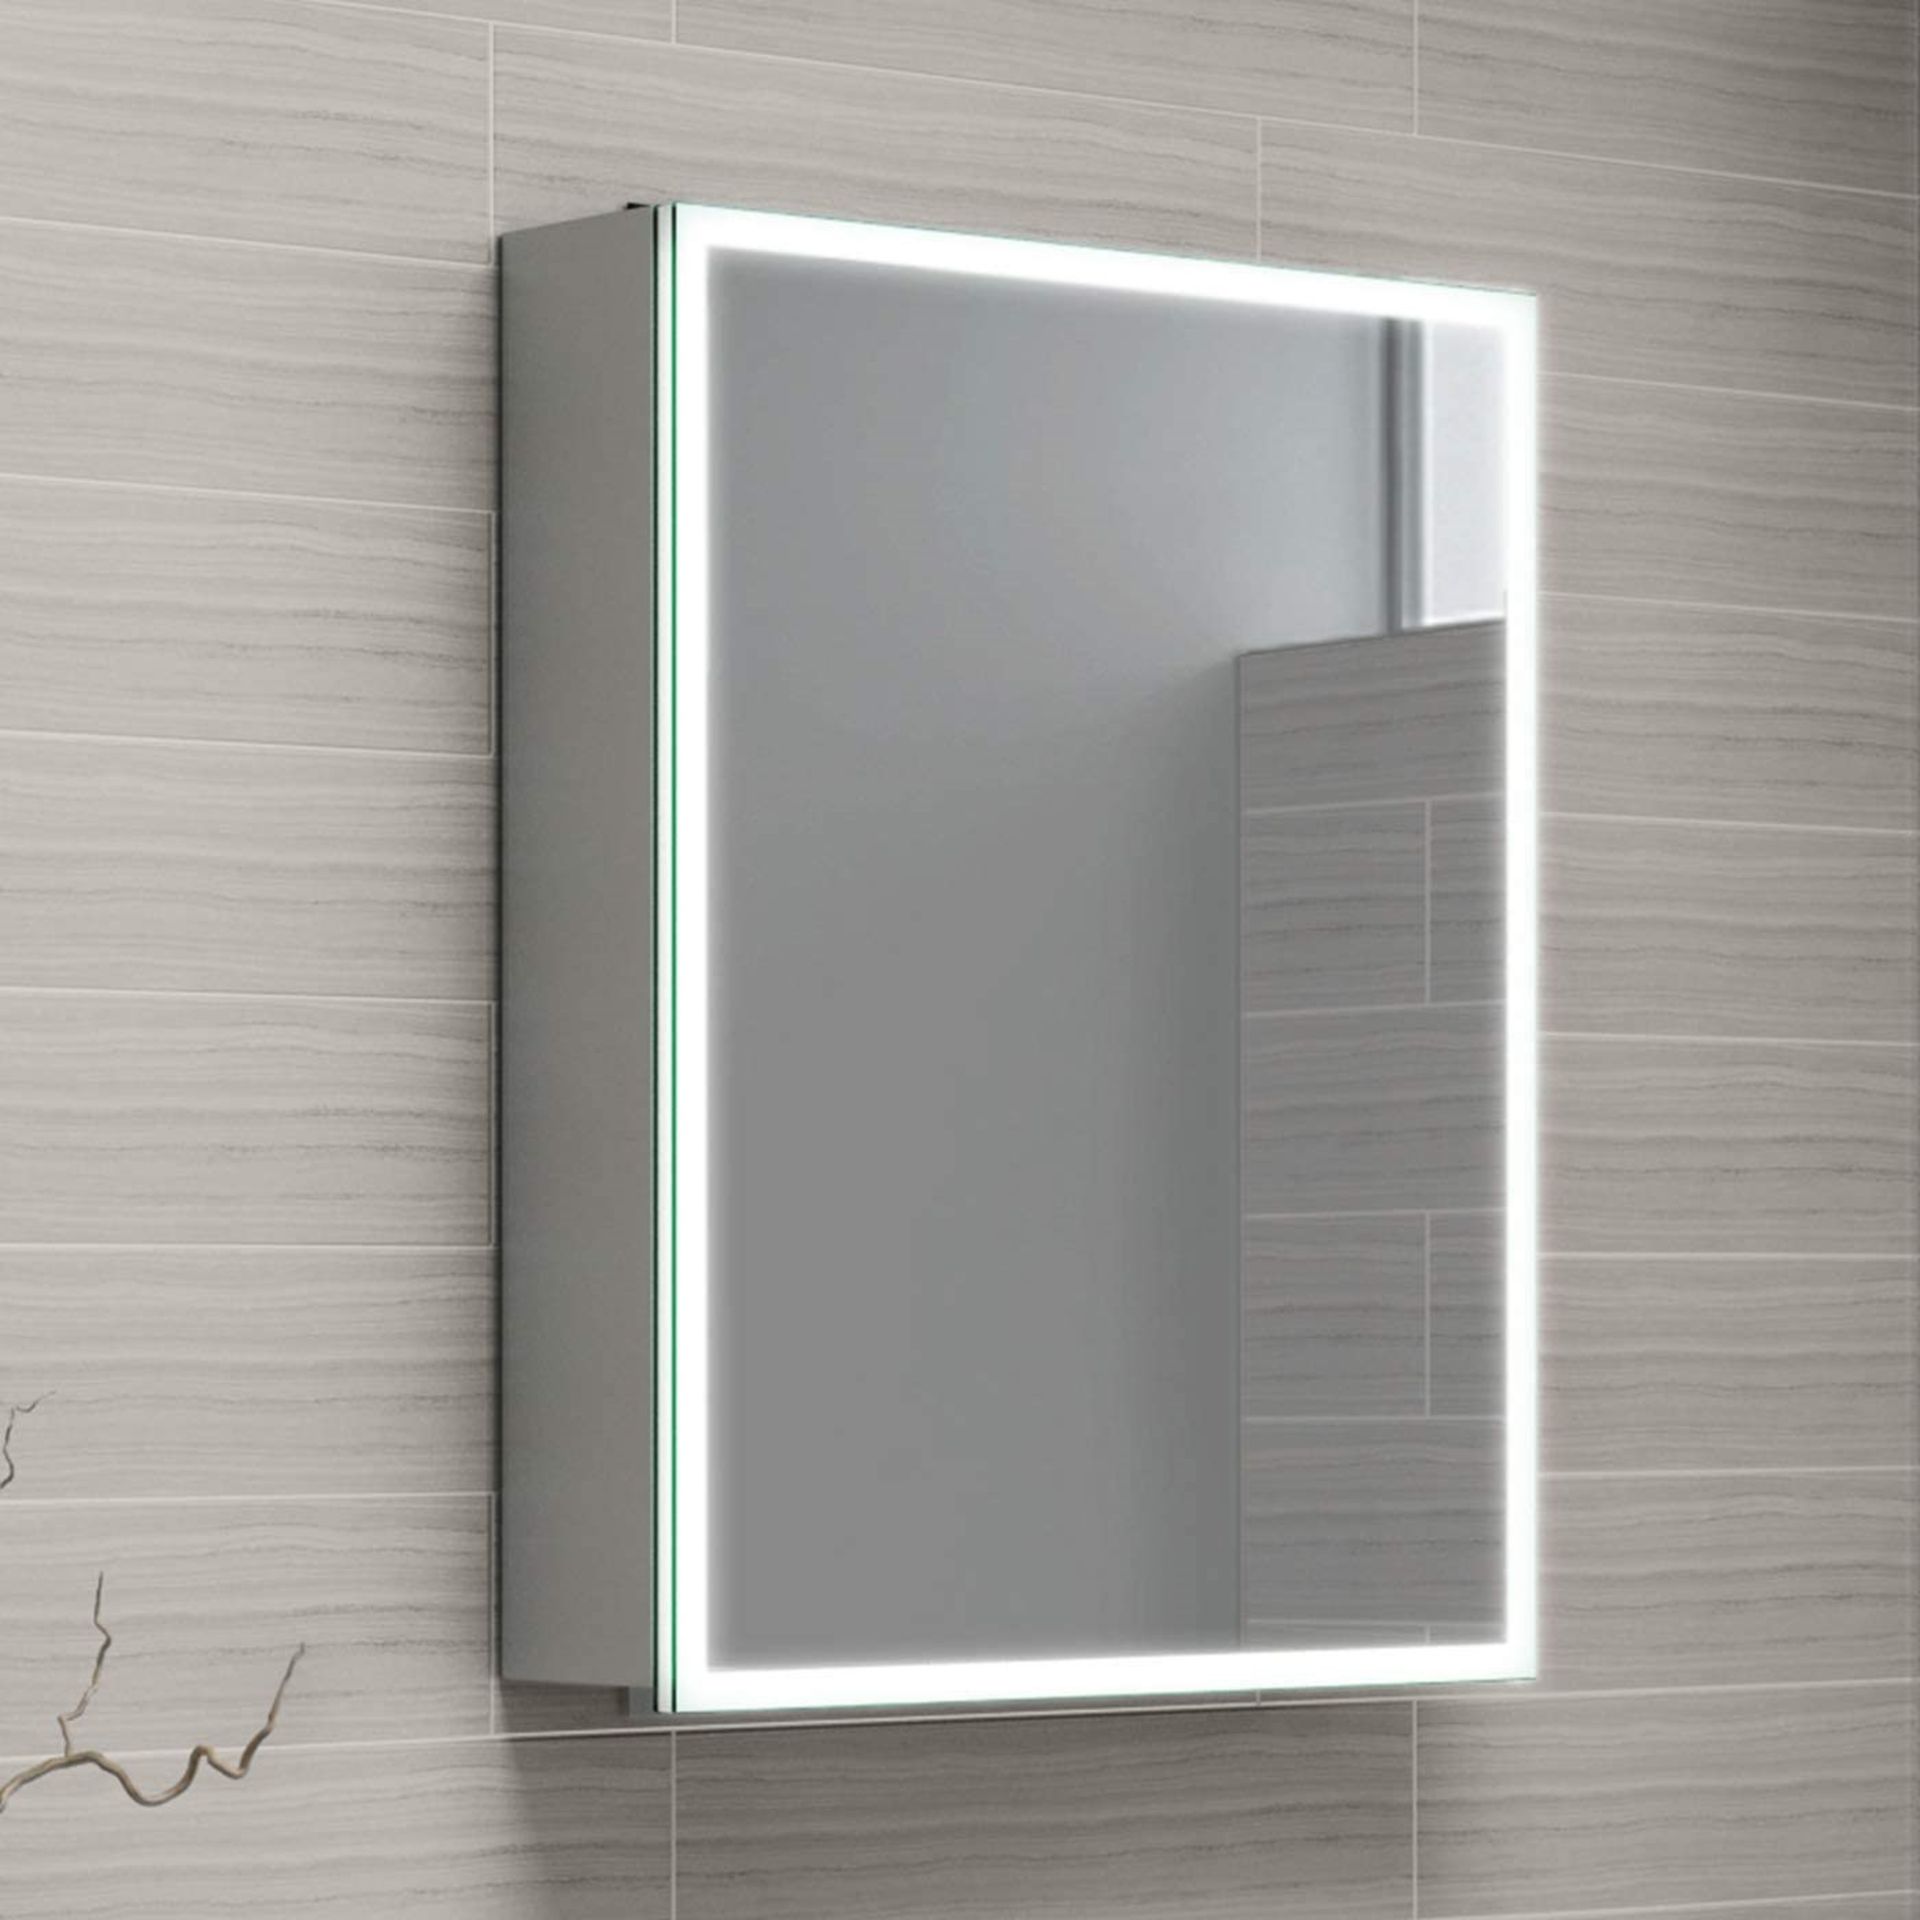 450x600 Cosmic Illuminated LED Mirror Cabinet. RRP £499.99.MC161.We love this mirror cabinet a... - Image 4 of 4